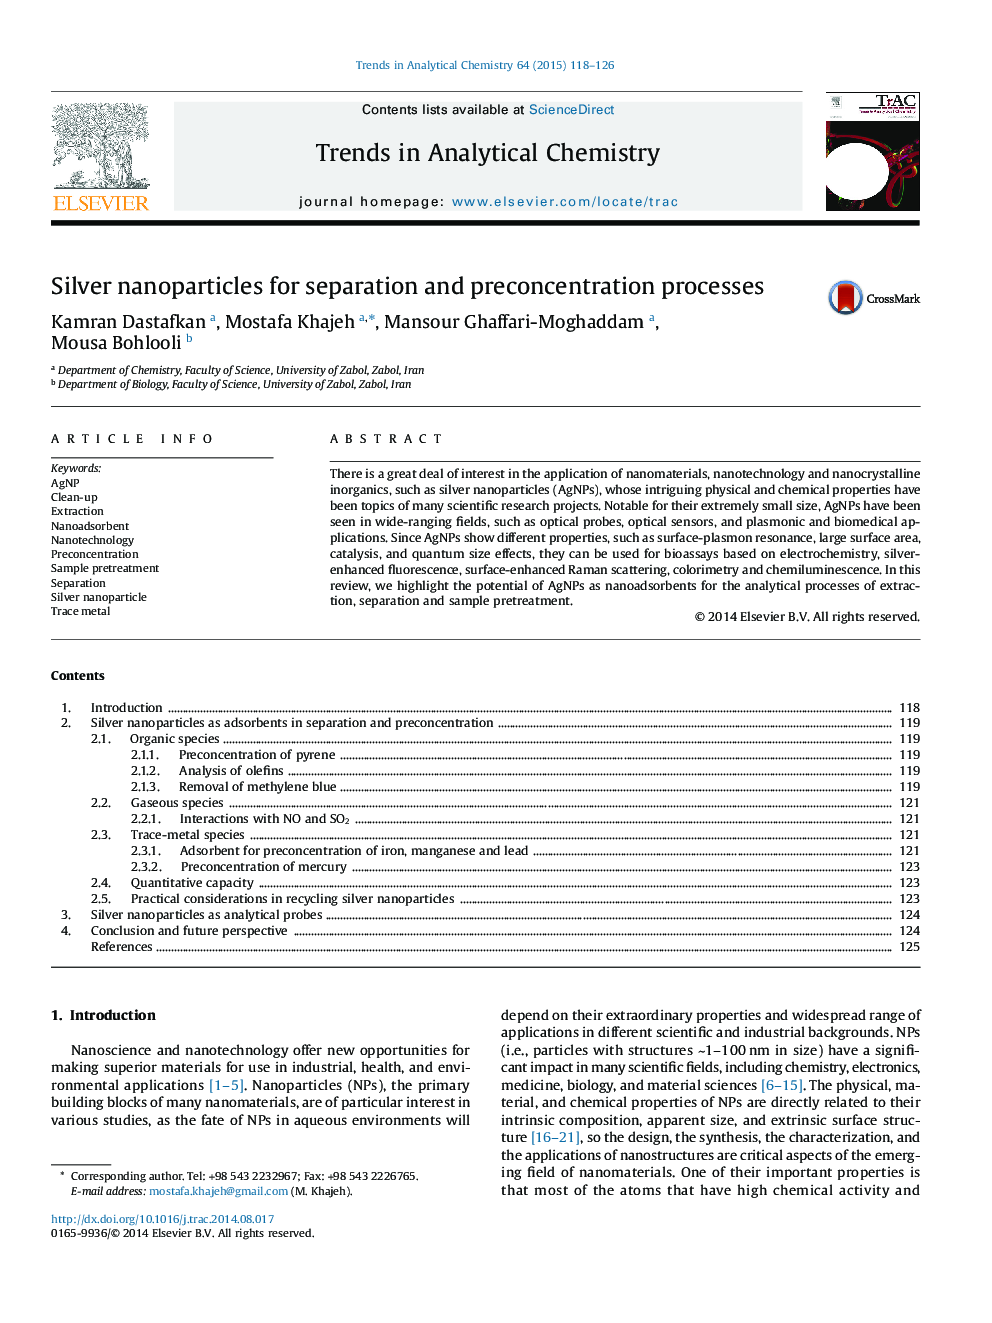 Silver nanoparticles for separation and preconcentration processes